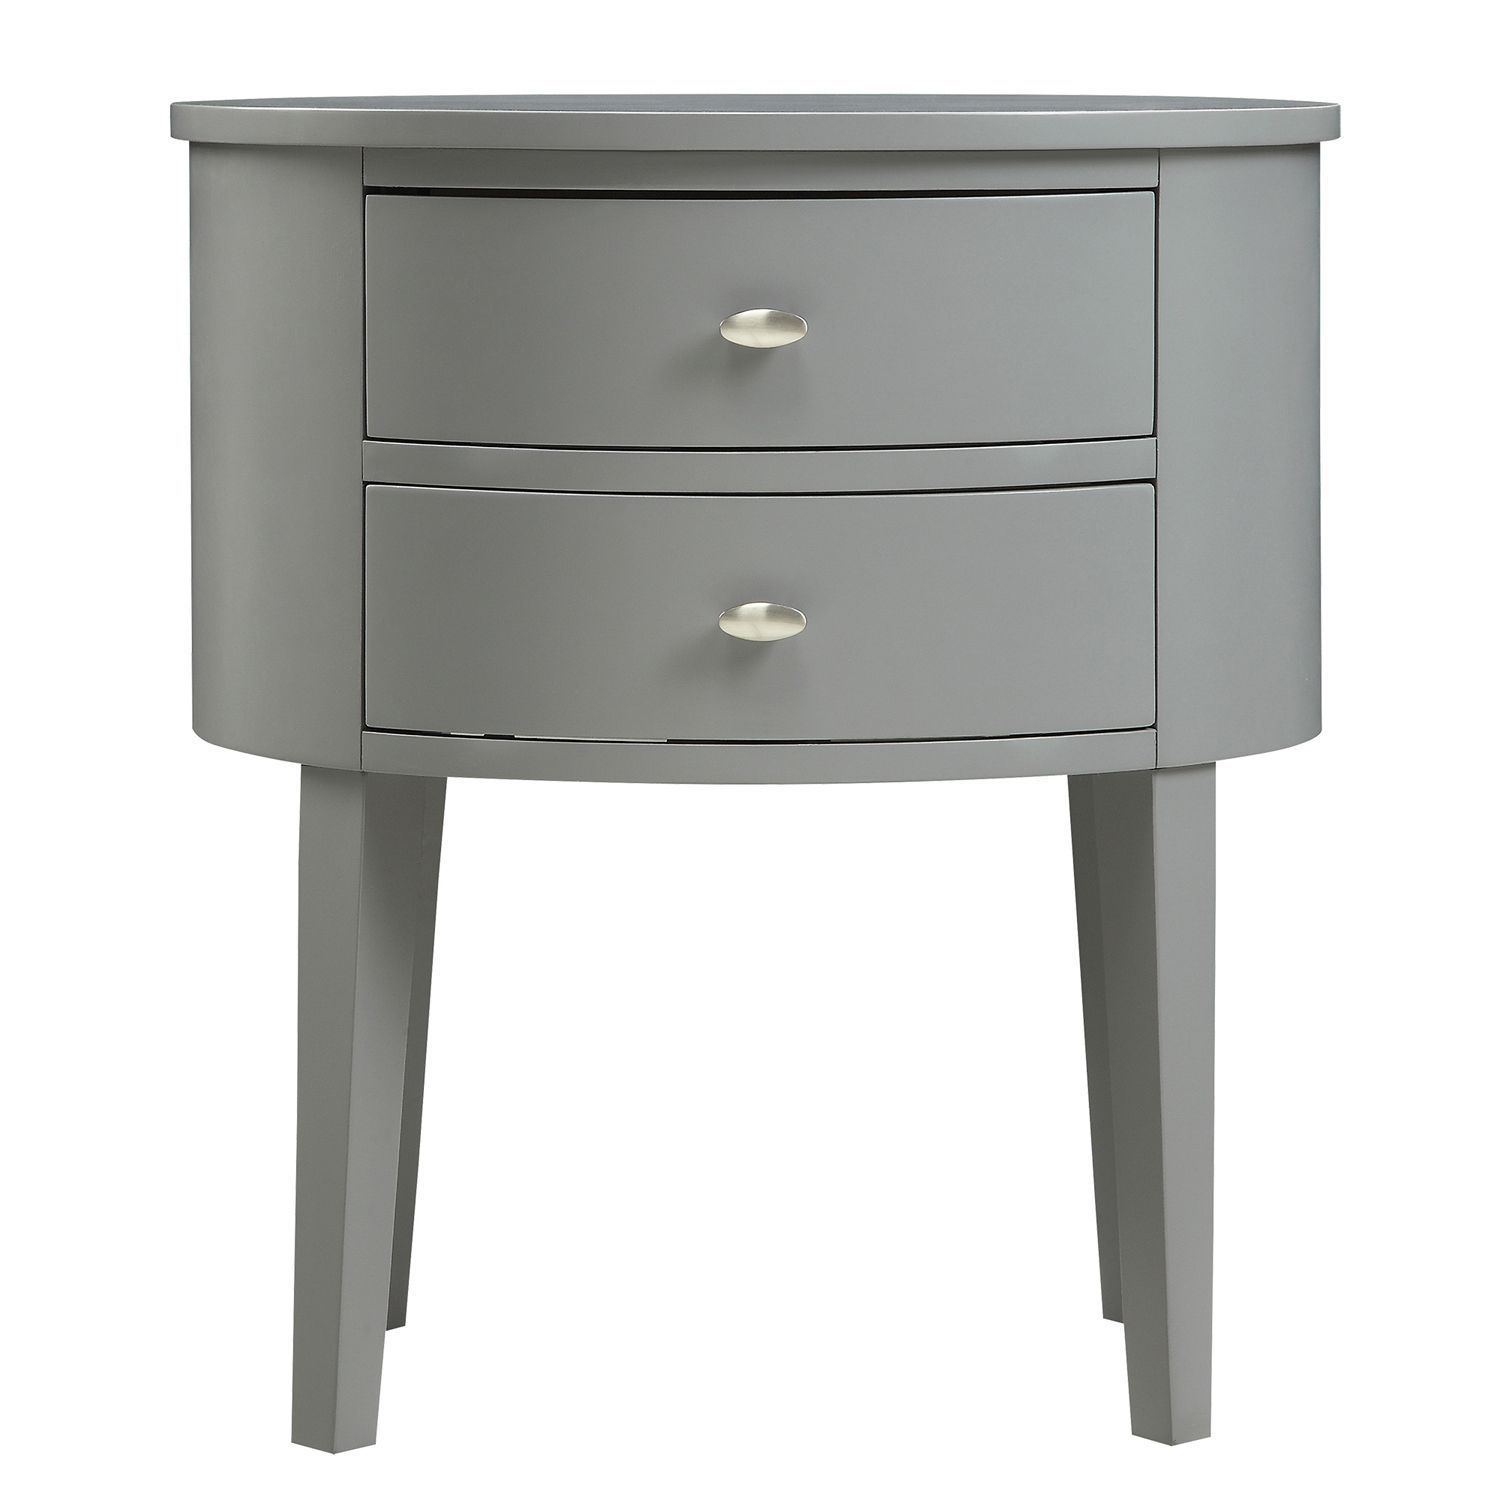 Gray Oval 2 Drawer End Table | End Tables, Table, Drawers Within 2 Drawer Oval Coffee Tables (View 6 of 15)